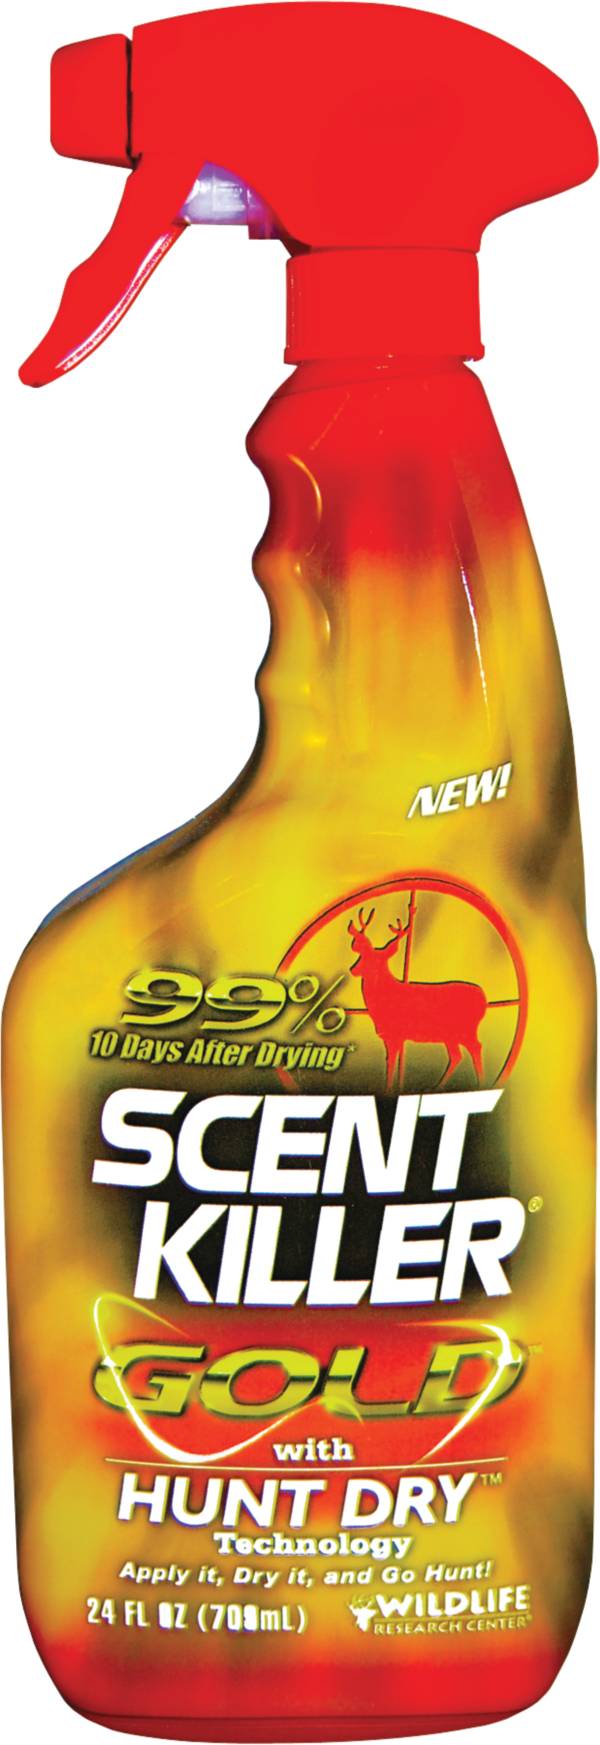 wildlife-research-center-scent-killer-gold-clothing-spray-dick-s